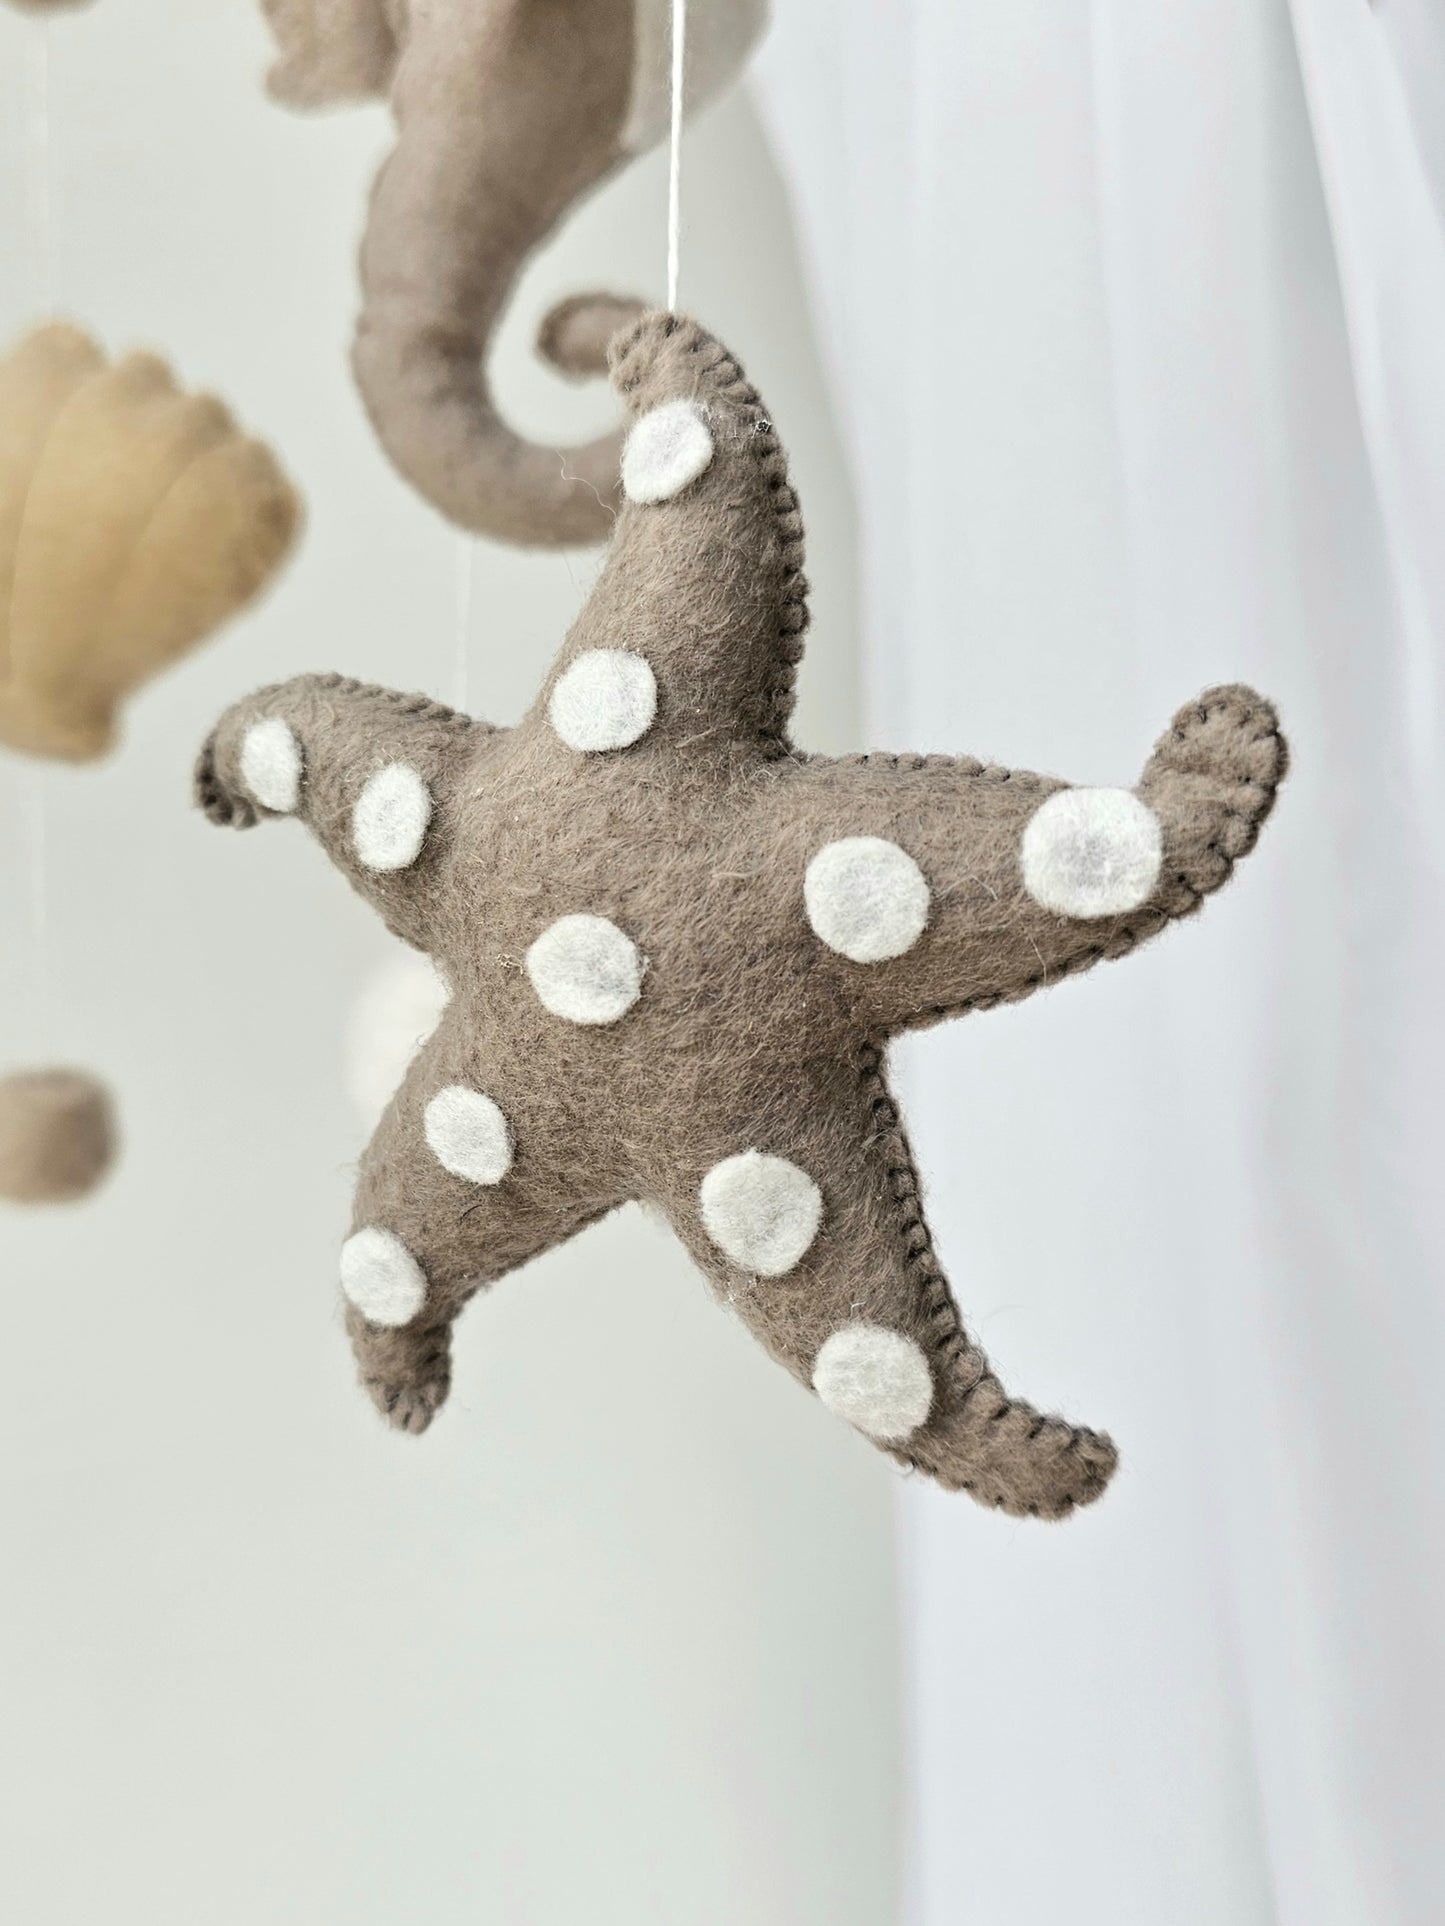 Baby Mobile Sea Life Nature beige